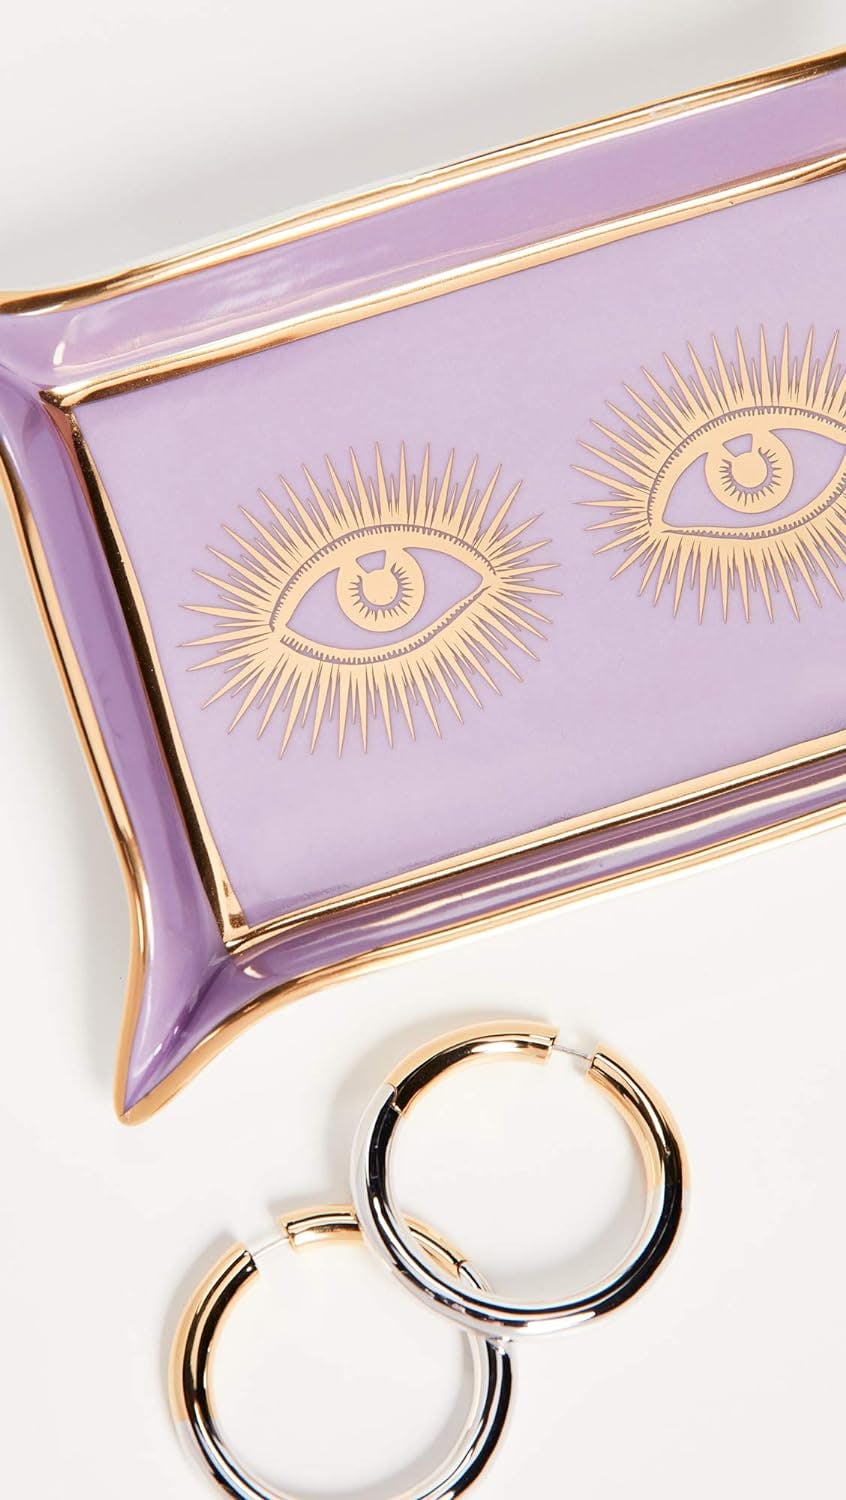 Amethyst Eyes Porcelain Valet Tray with 24-Karat Gold Accents